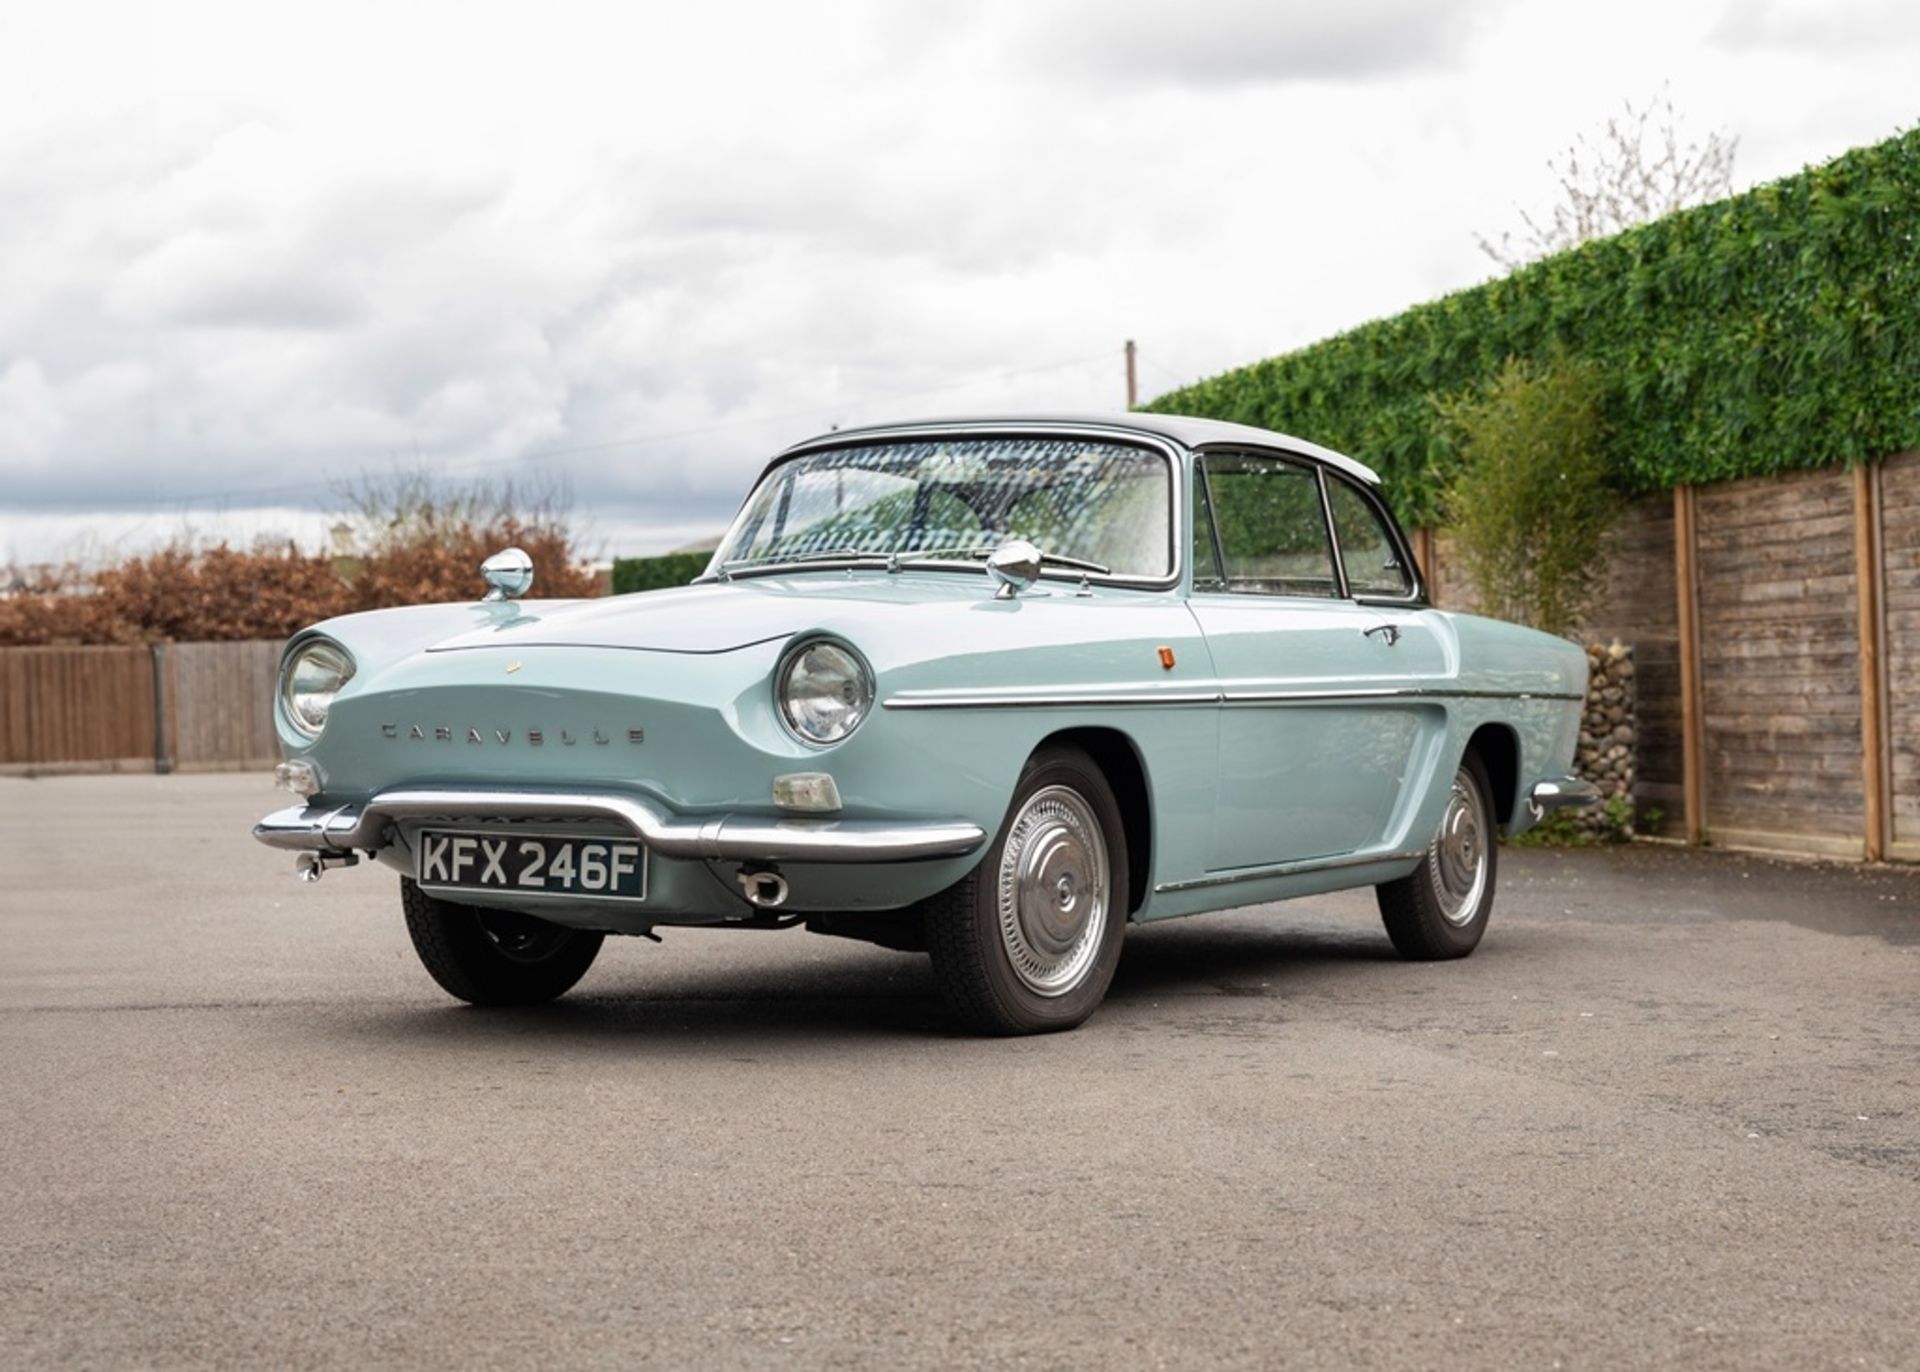 1968 Renault Caravelle Convertible - Image 7 of 20